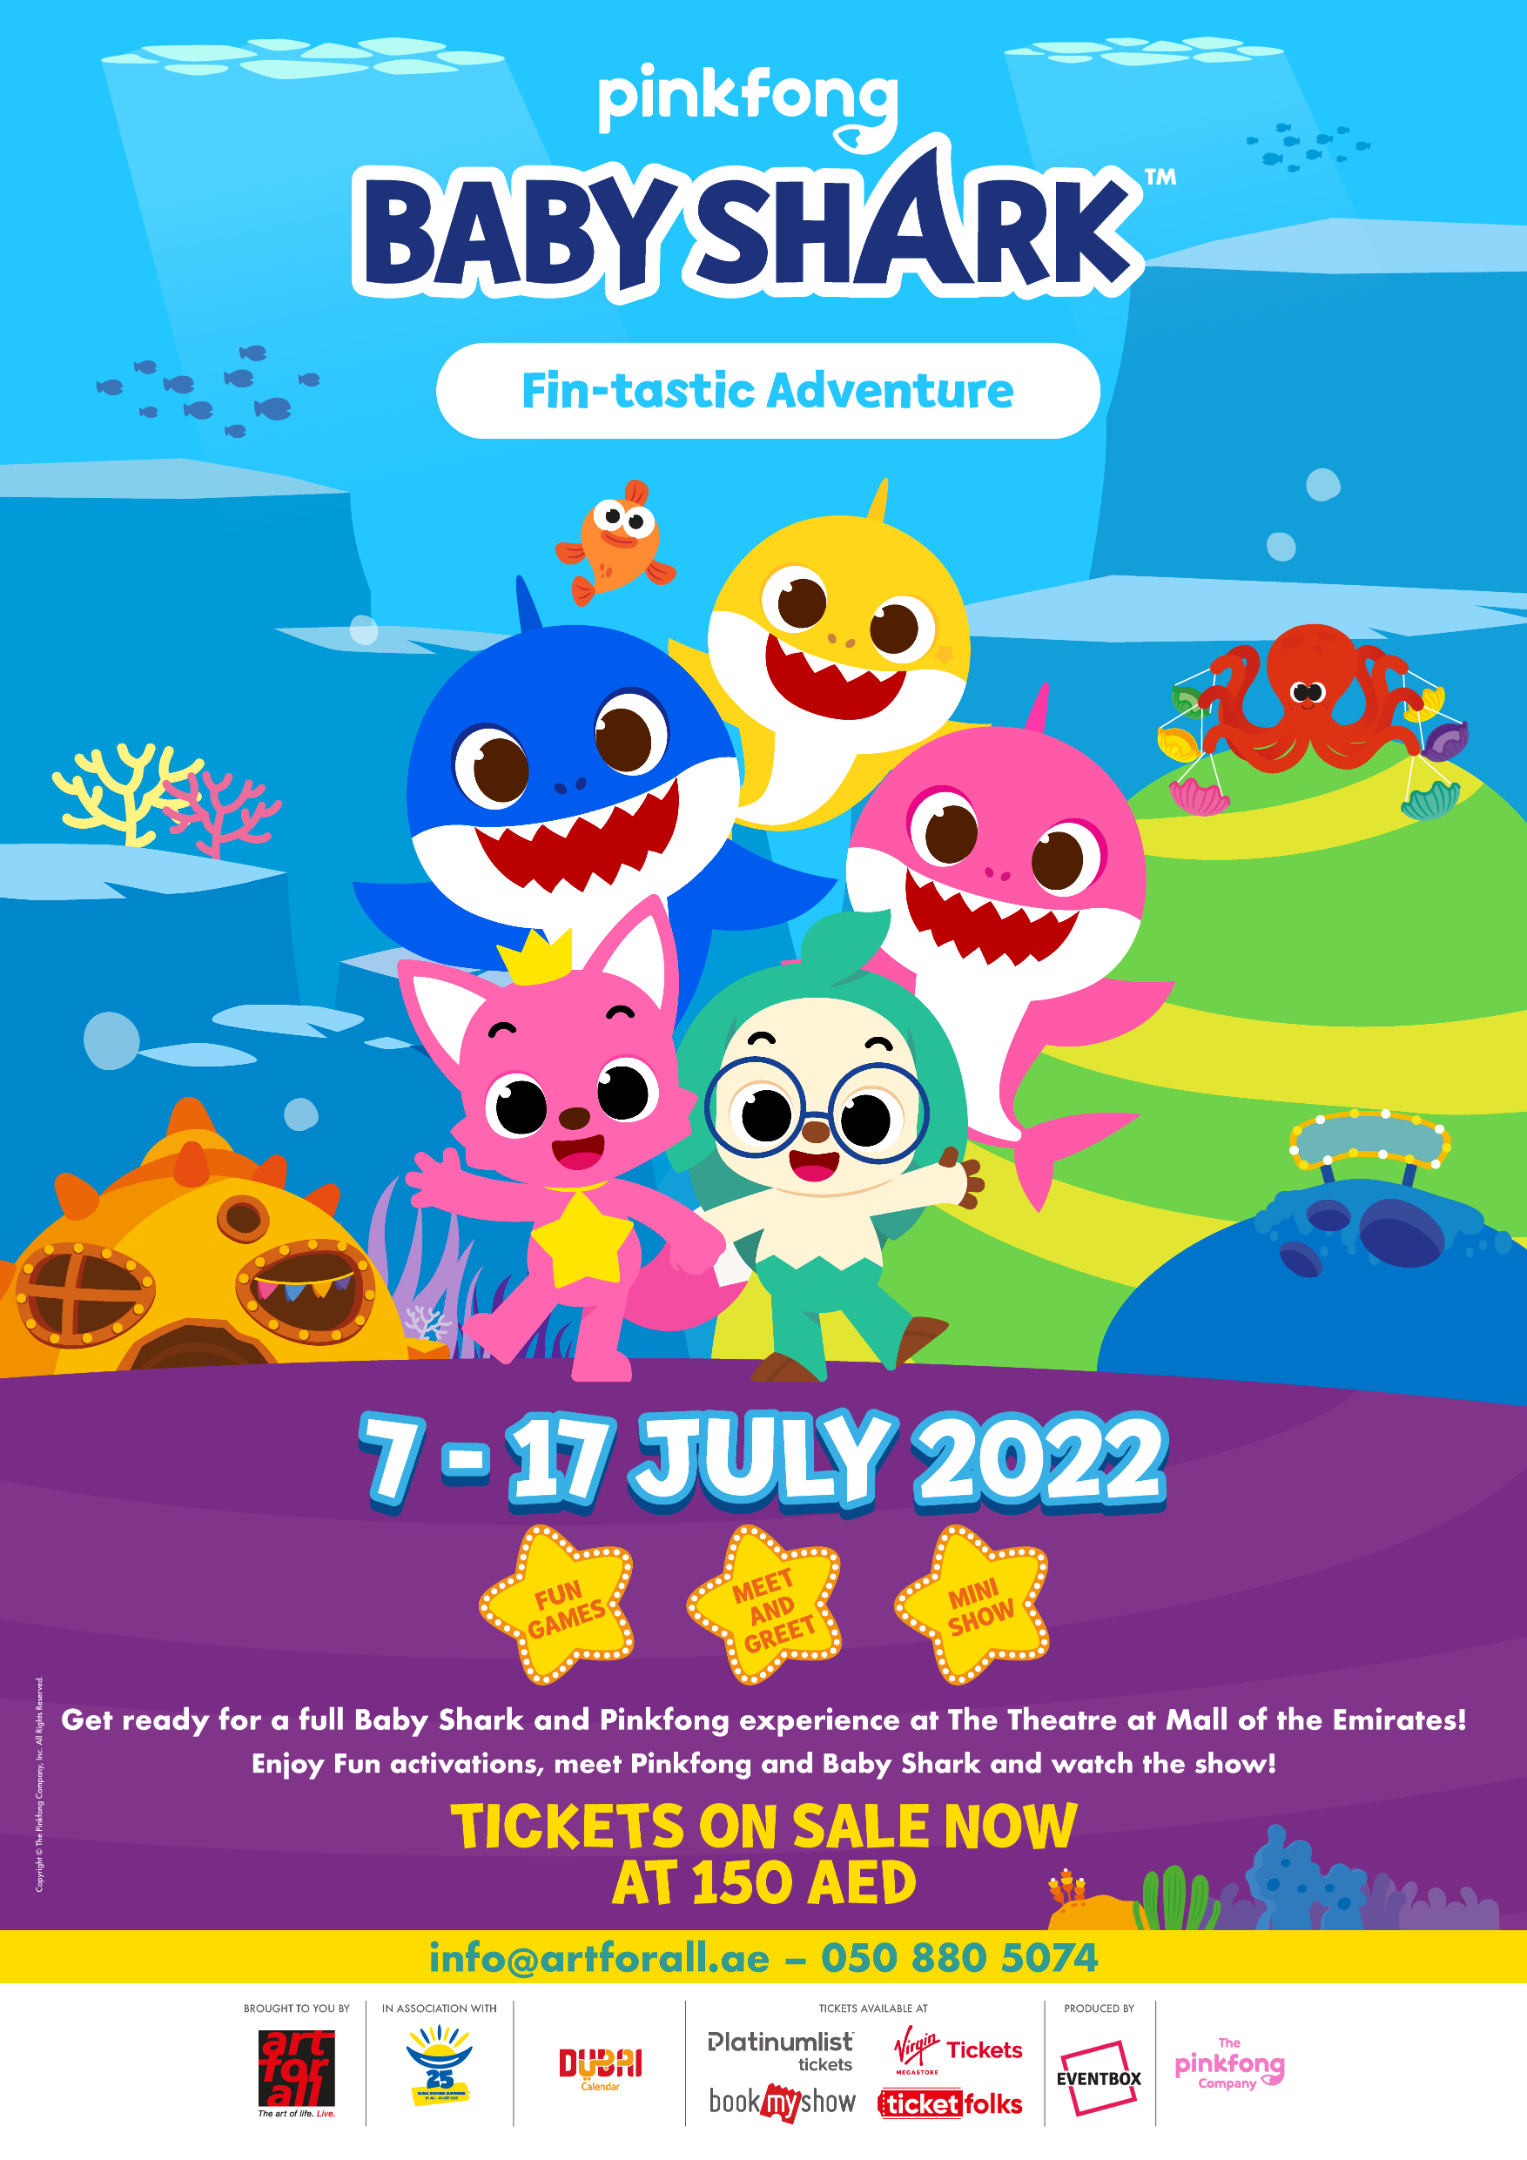 Creator of Baby Shark, Pinkfong to launch music variety show - KED Global